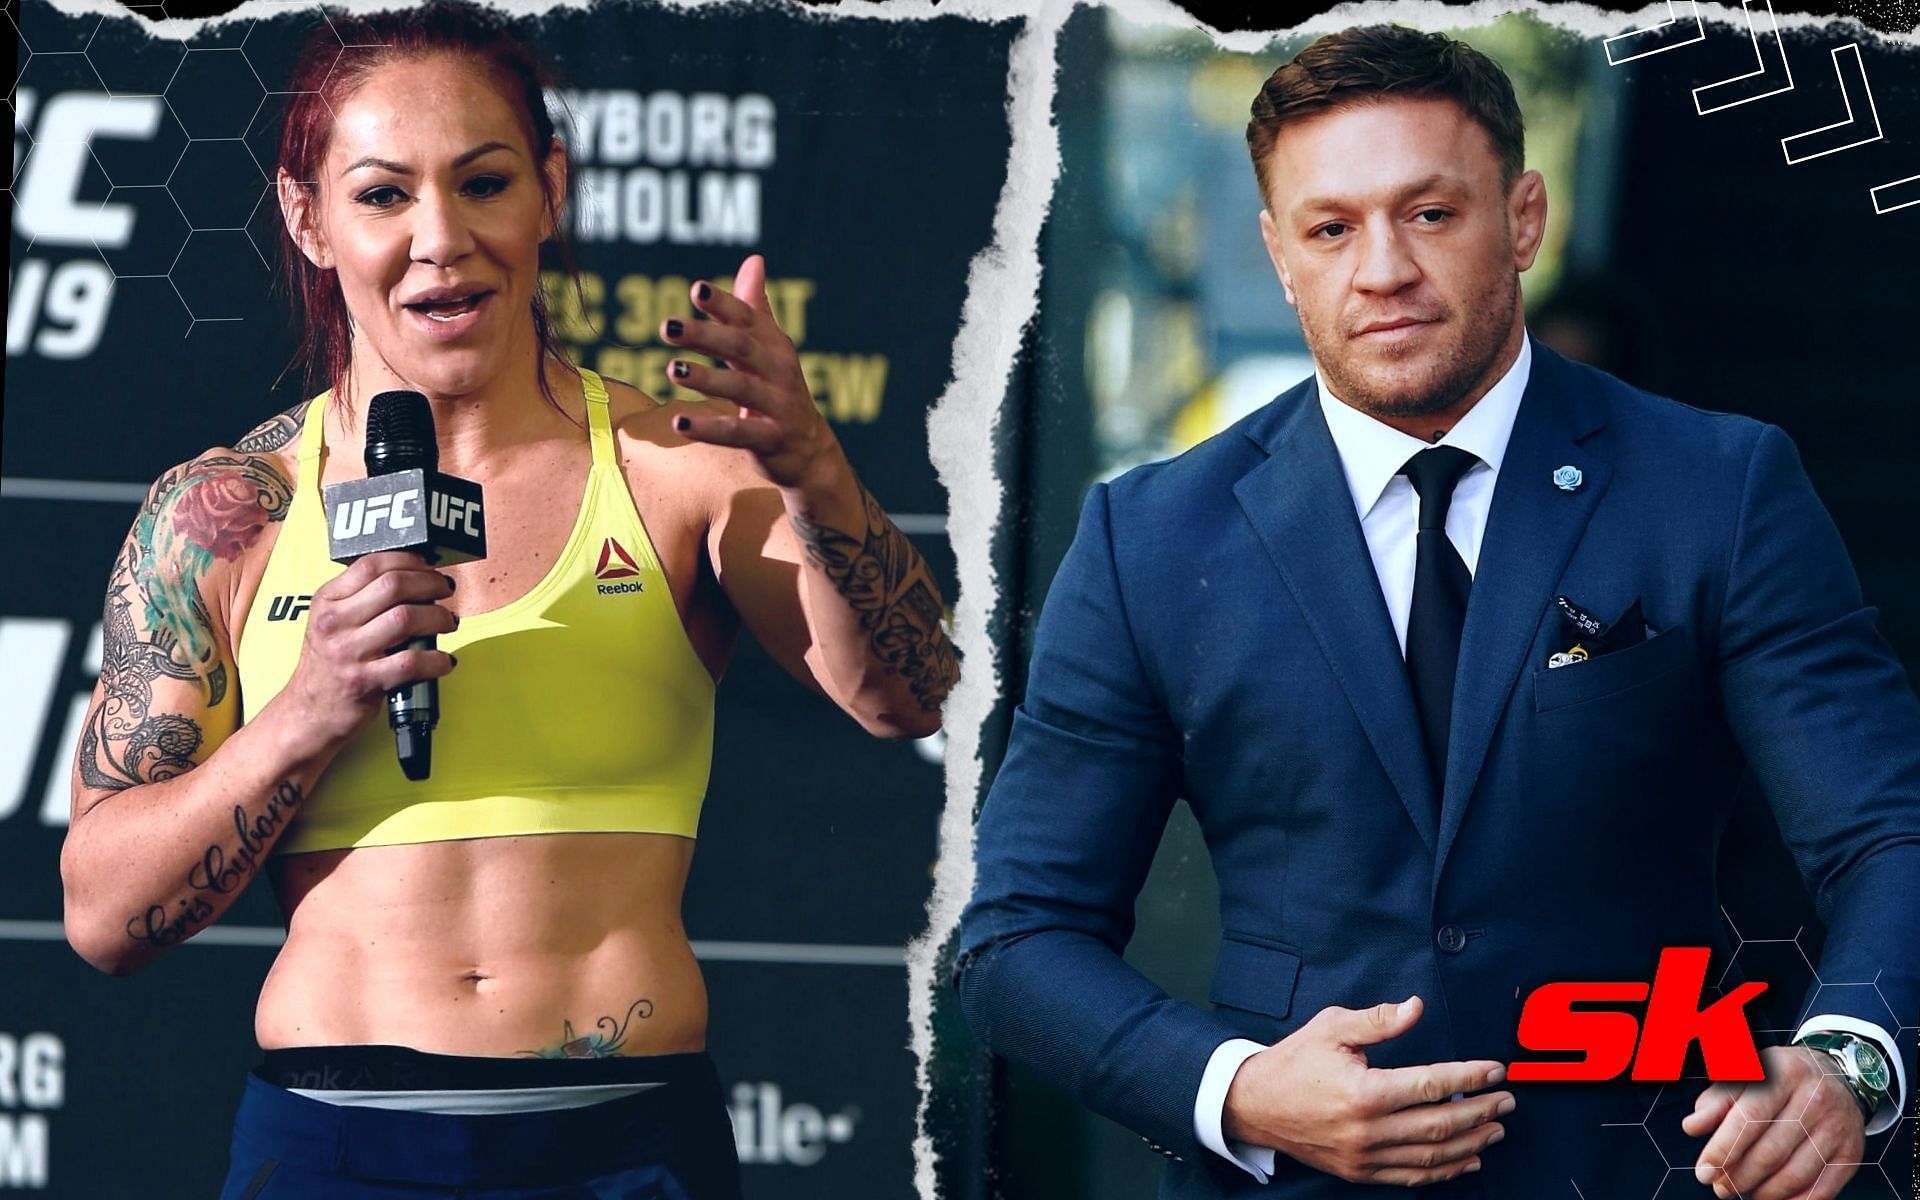  Conor McGregor responds to Cris Cyborg. [Image credits: Getty Images]